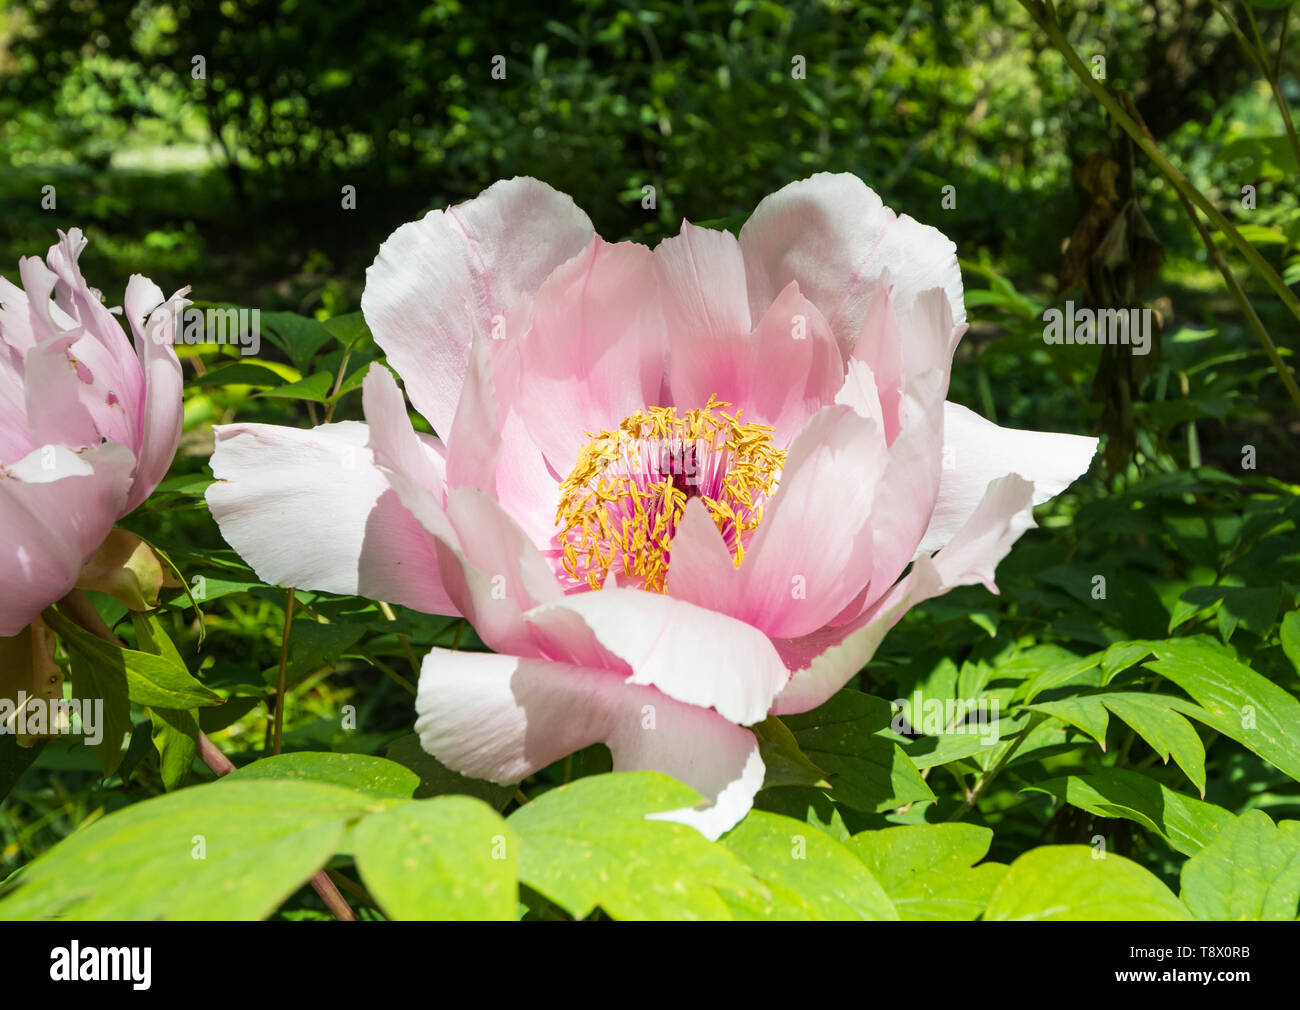 White and pink Tree Peony, a large flower from the genus Paeonia, growing in Spring (May) in West Sussex, England, UK. Stock Photo